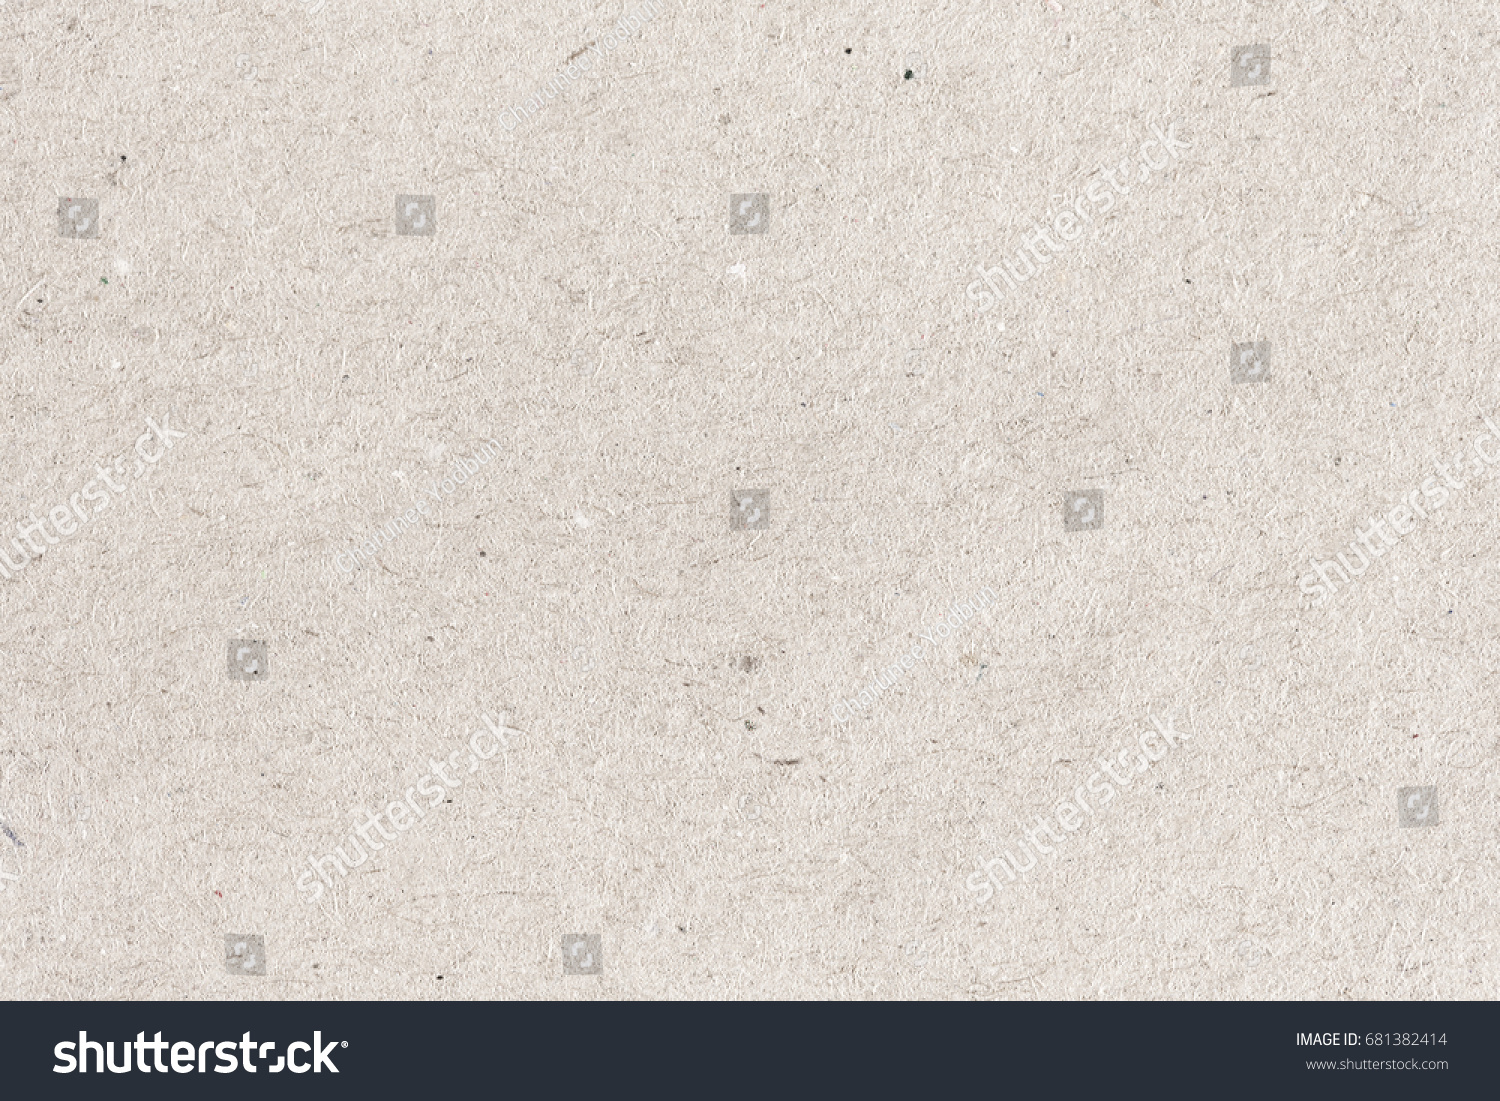 Gray recycled paper texture background #681382414